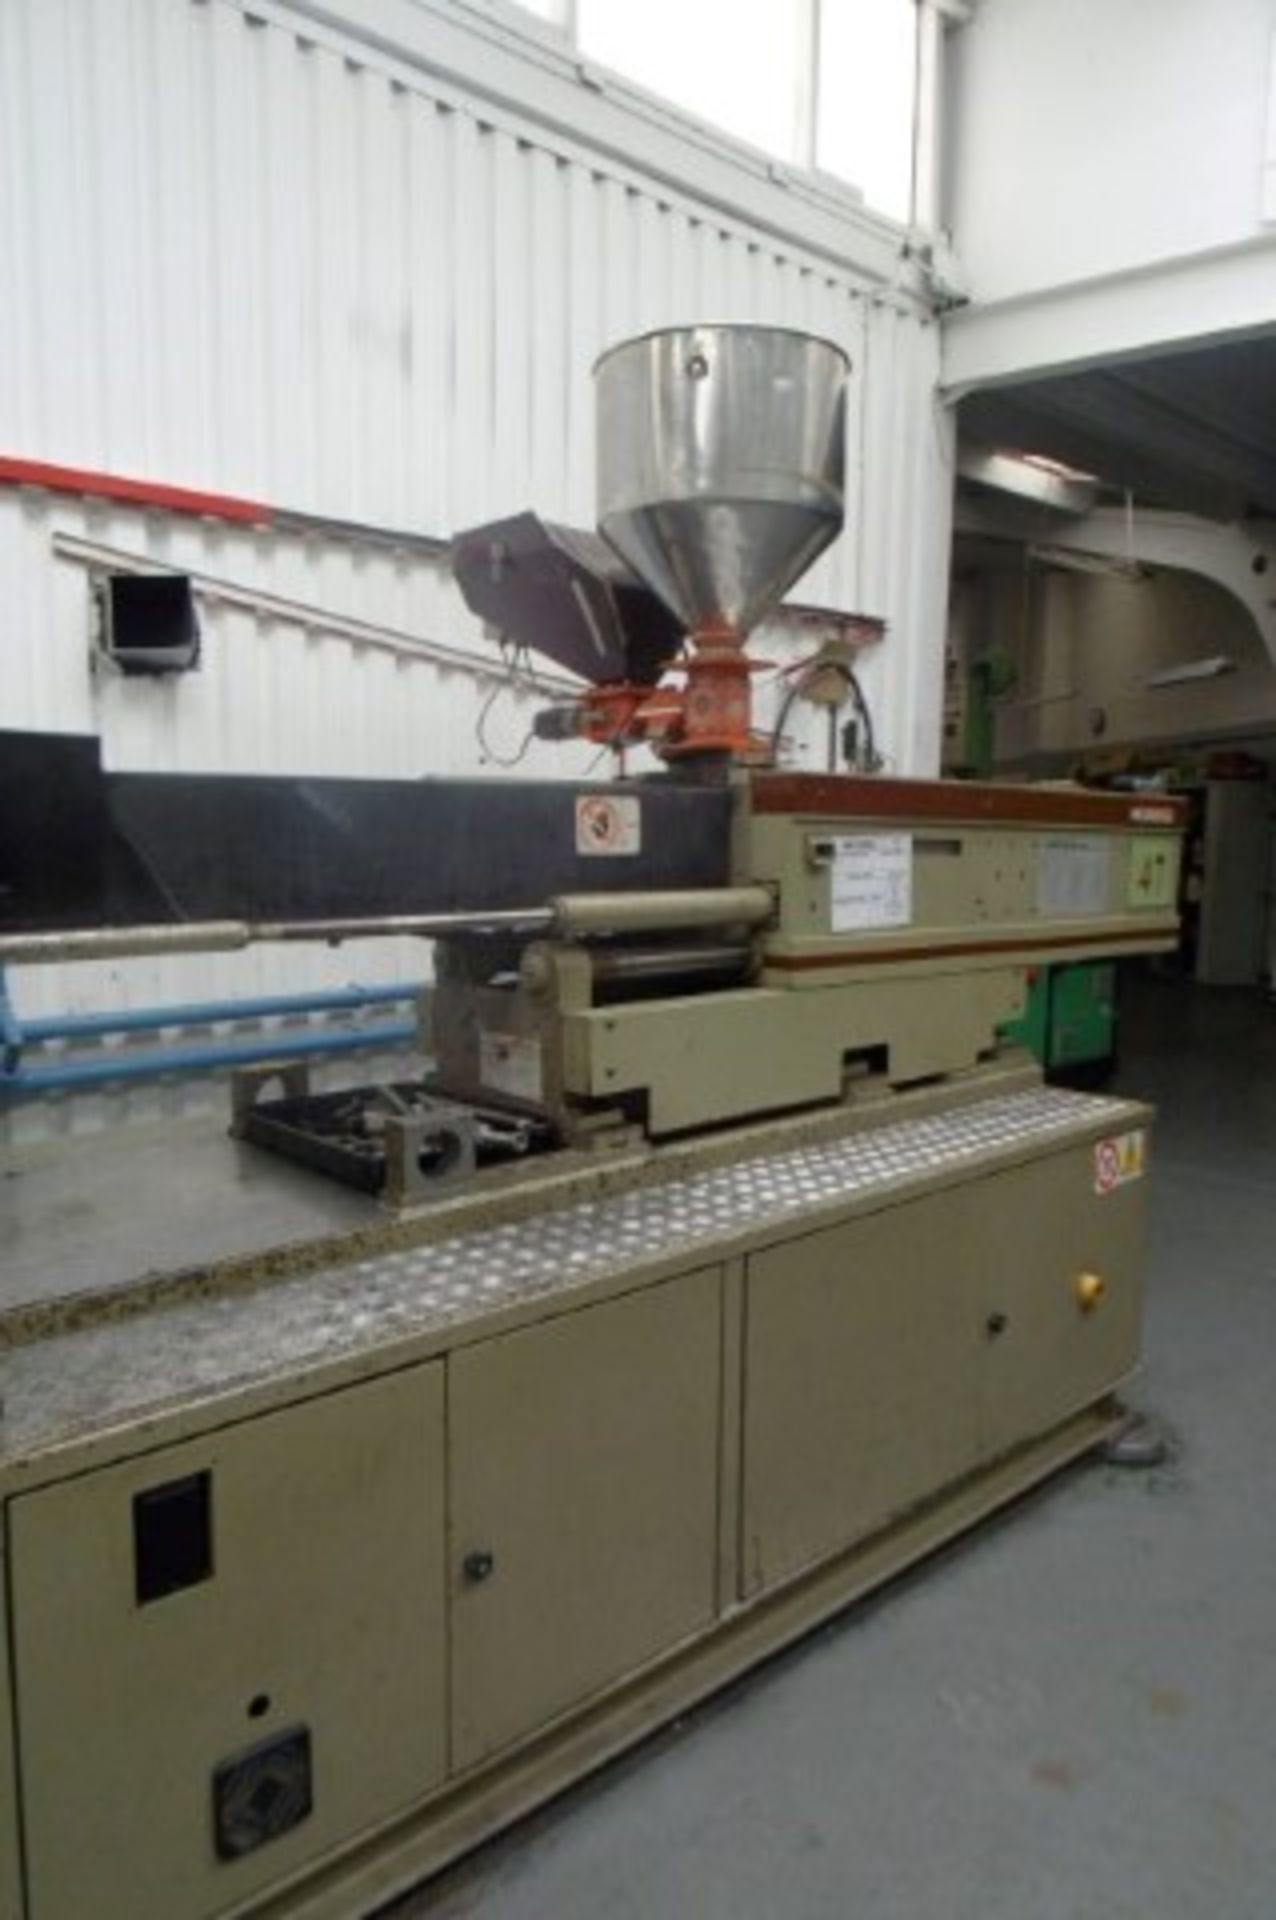 Negri Bossi NB330 horizontal plastic injection moulding machine Serial Number: 54-374 with - Image 3 of 3